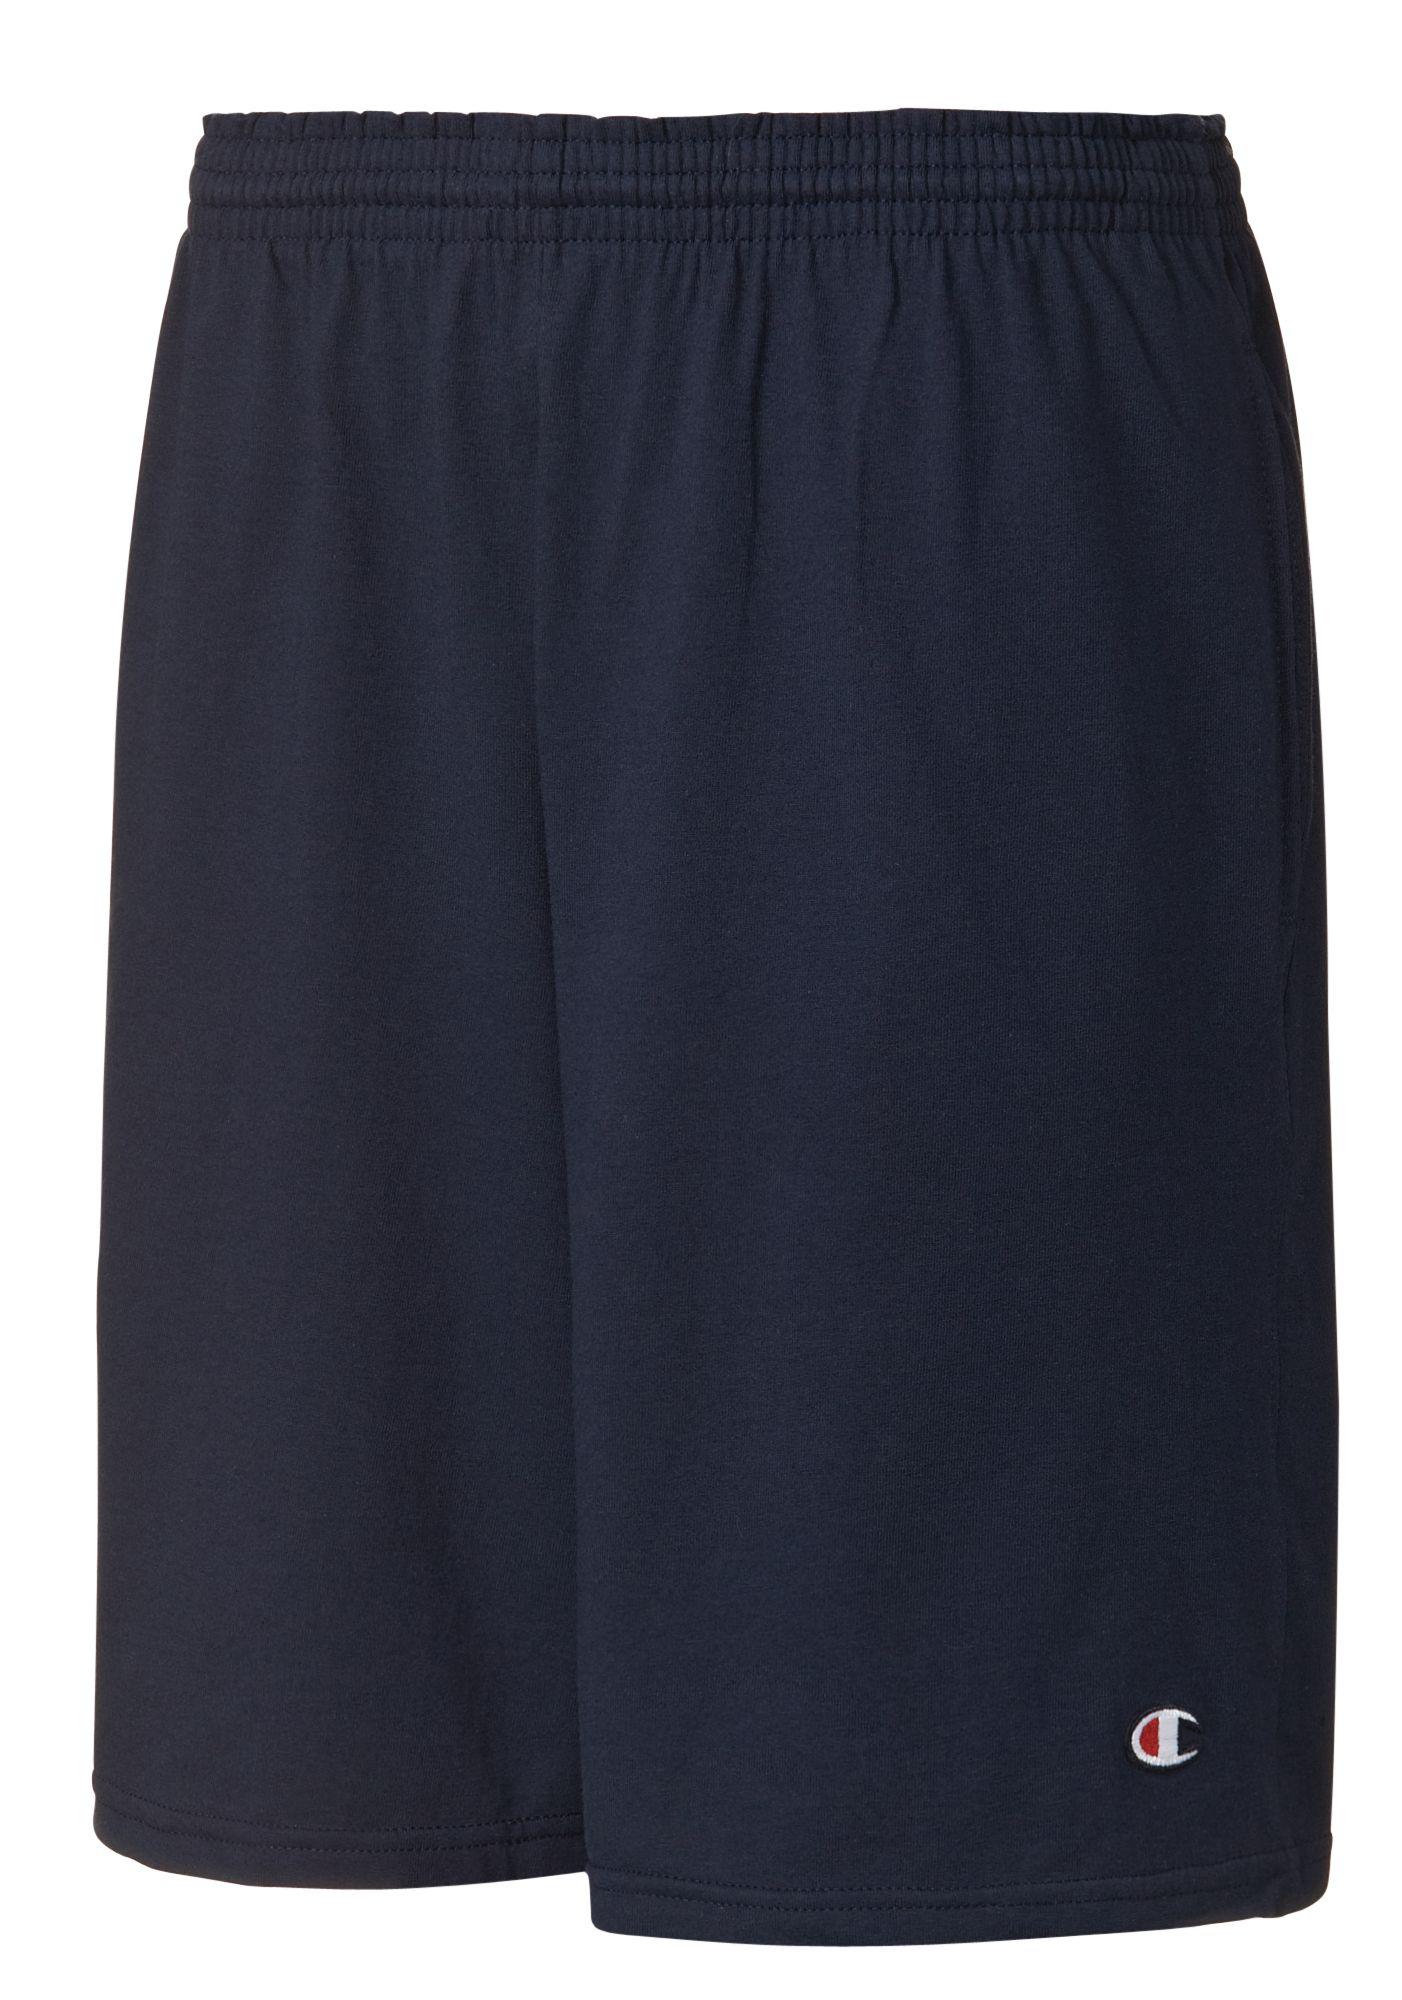 Lyst - Champion Jersey Shorts in Blue for Men